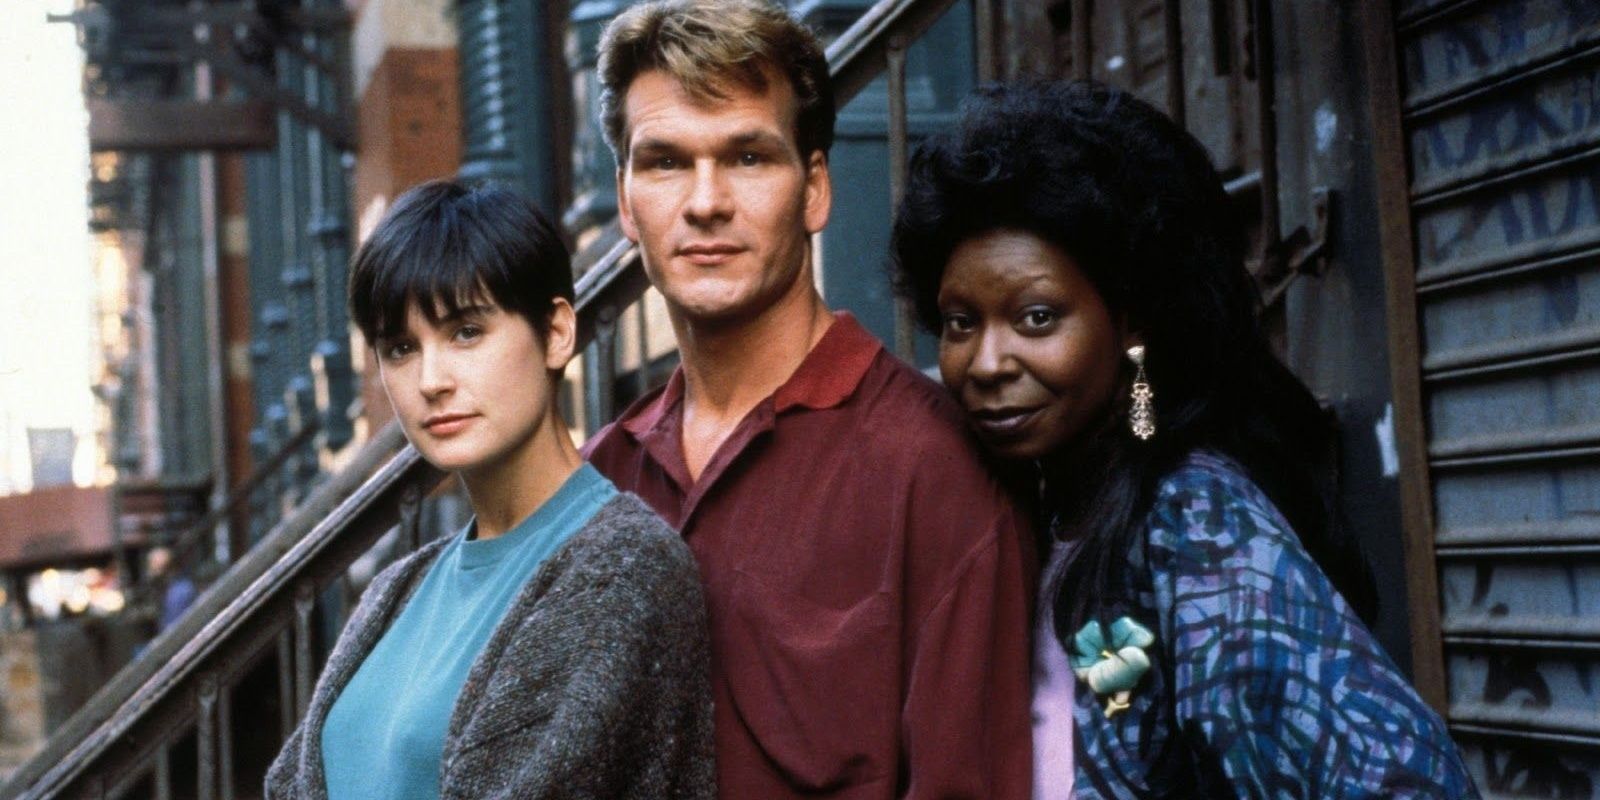 Demi Moore, Patrick Swayze, and Whoopi Goldberg as their characters in Ghost